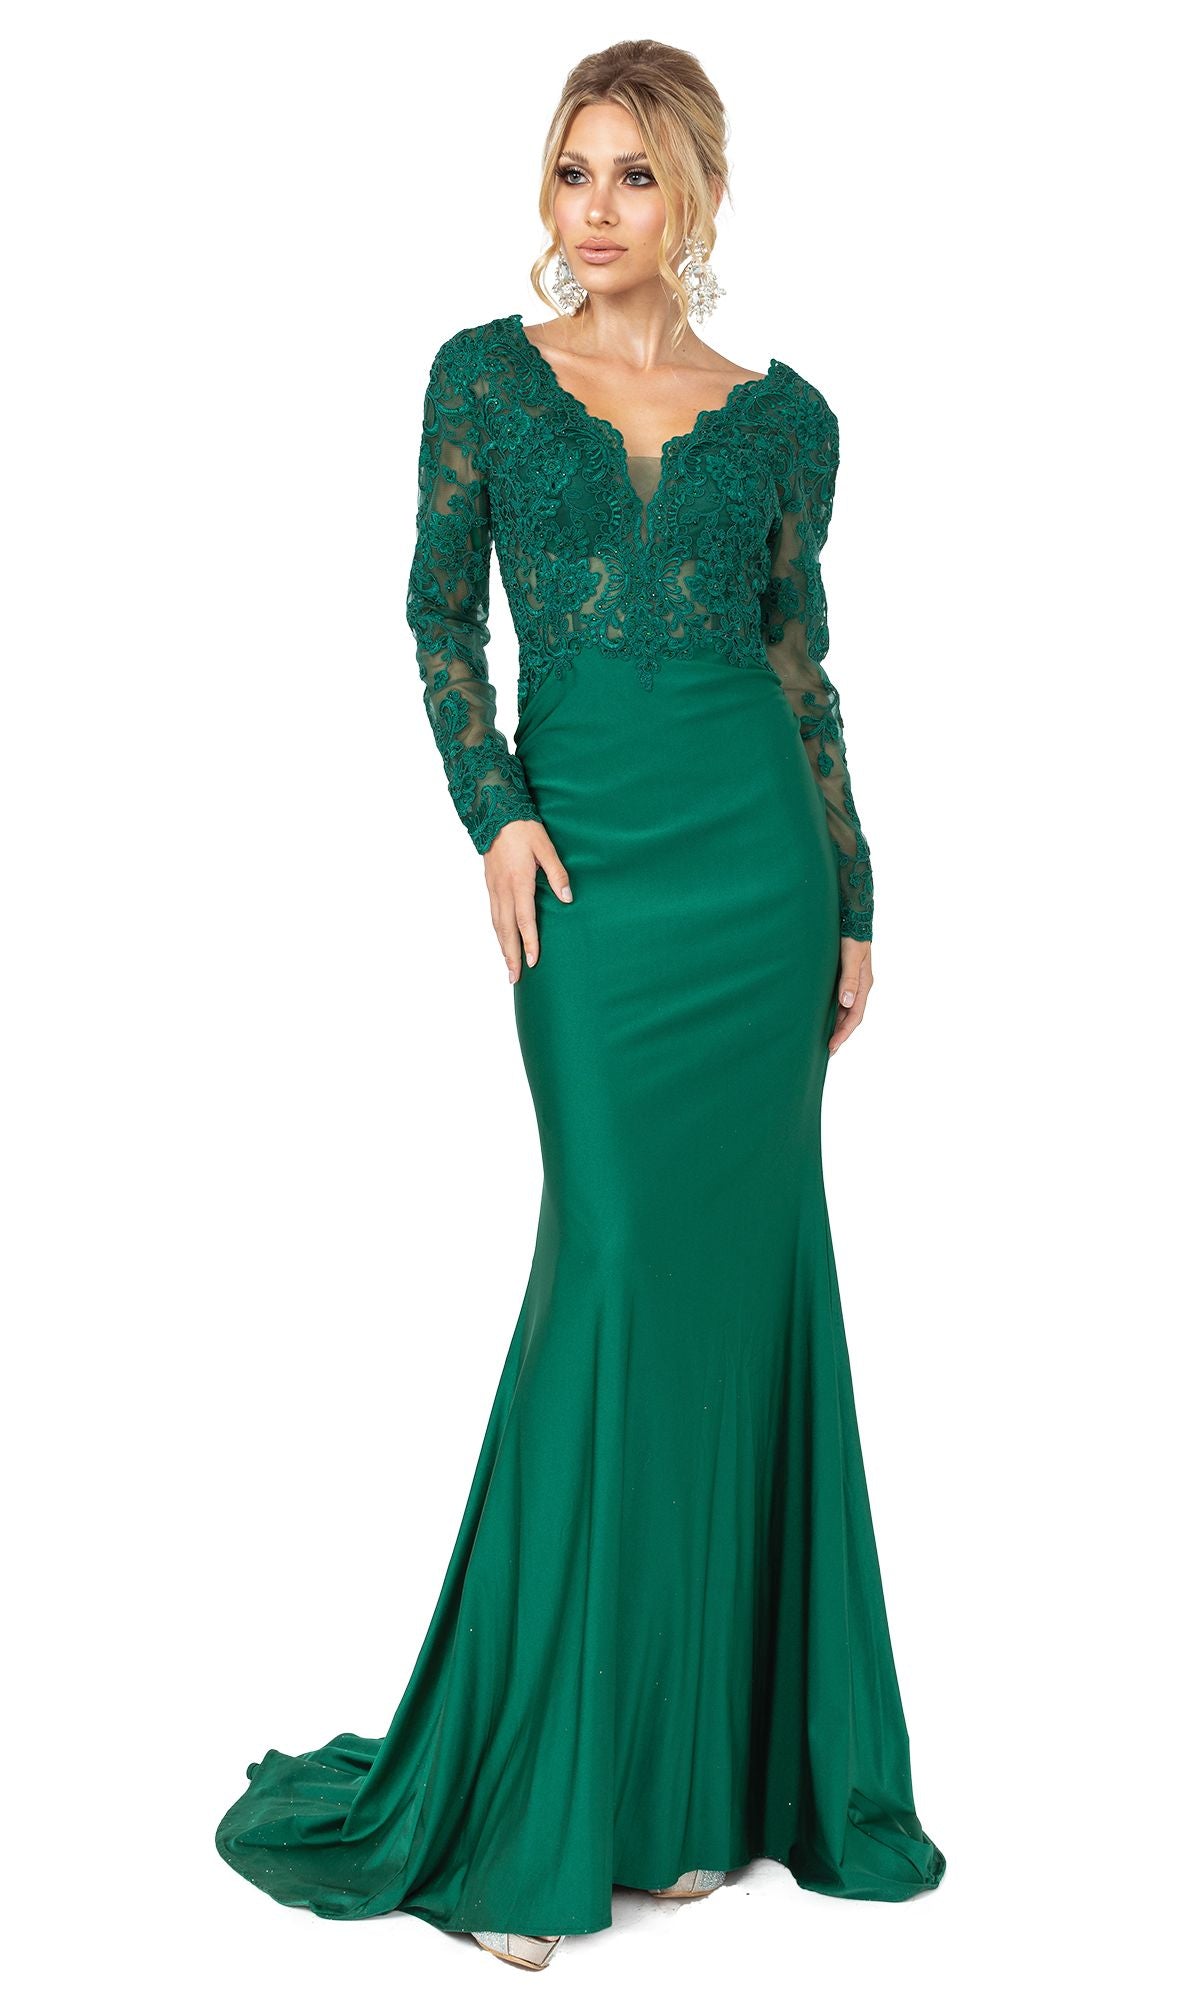 Long Formal Prom Dress with Lace Sleeves - PromGirl